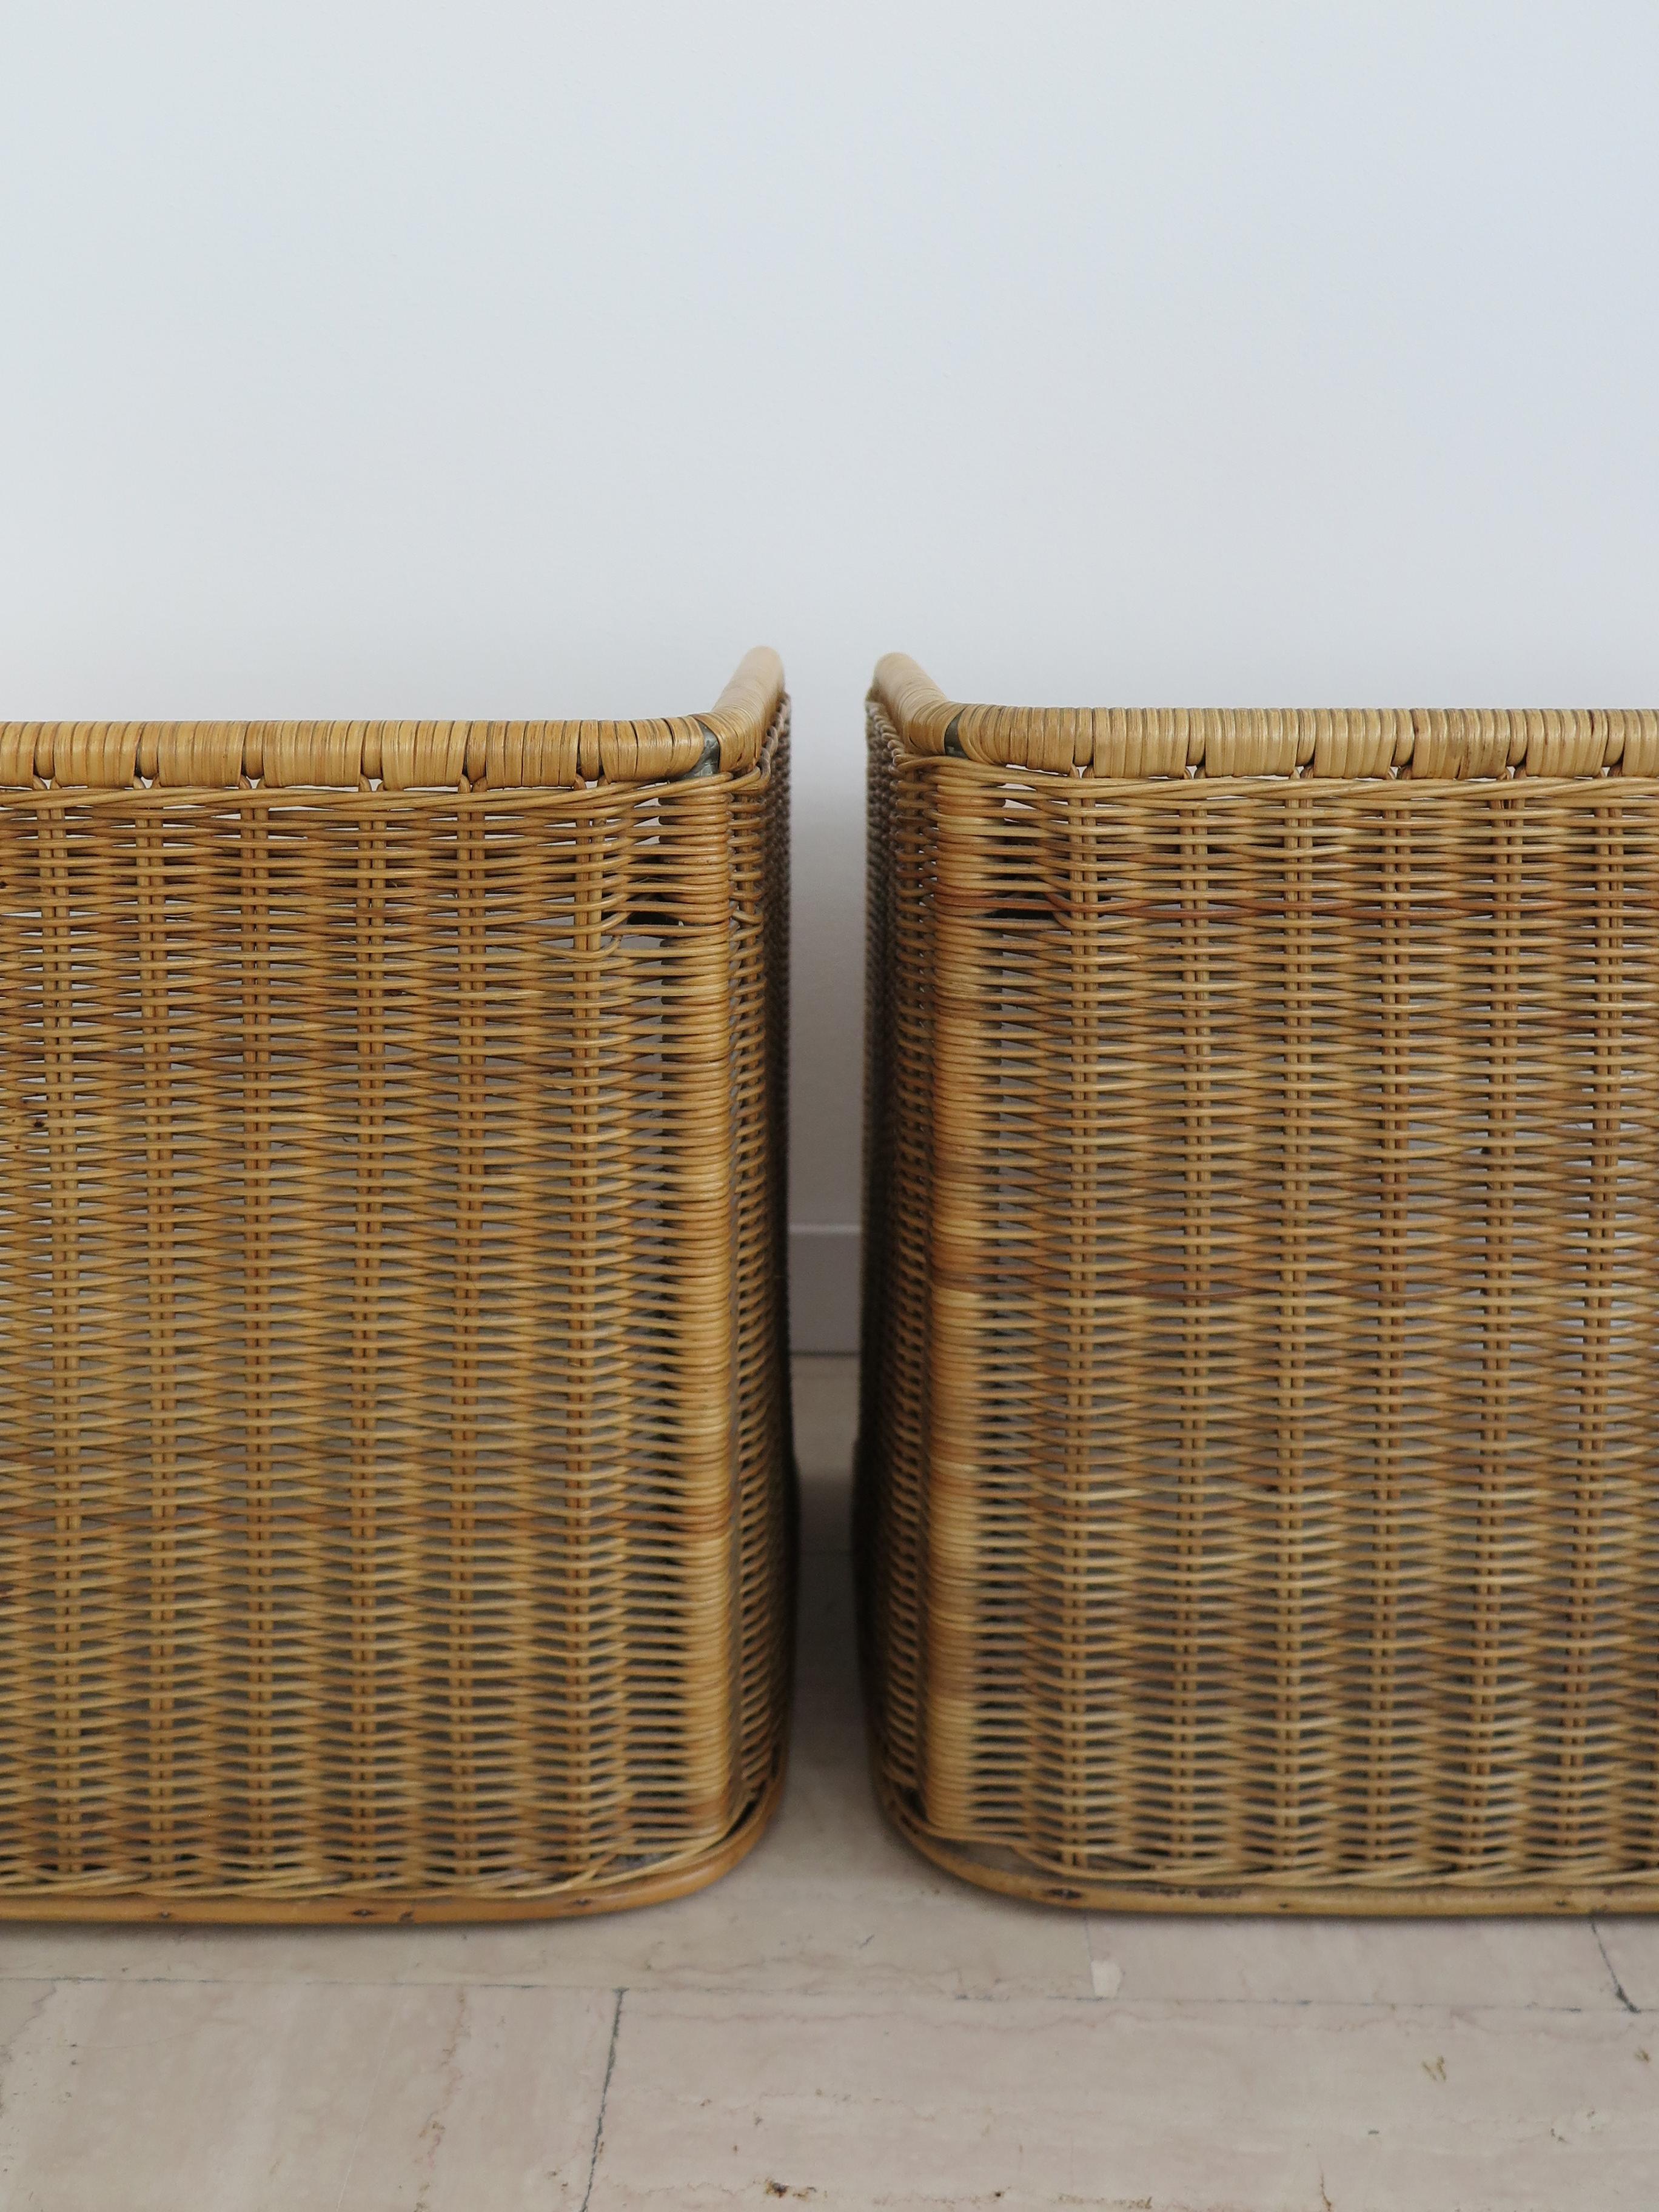 Danish Italian Midcentury Rattan Bamboo Bedside Tables Night Stands, 1950s For Sale